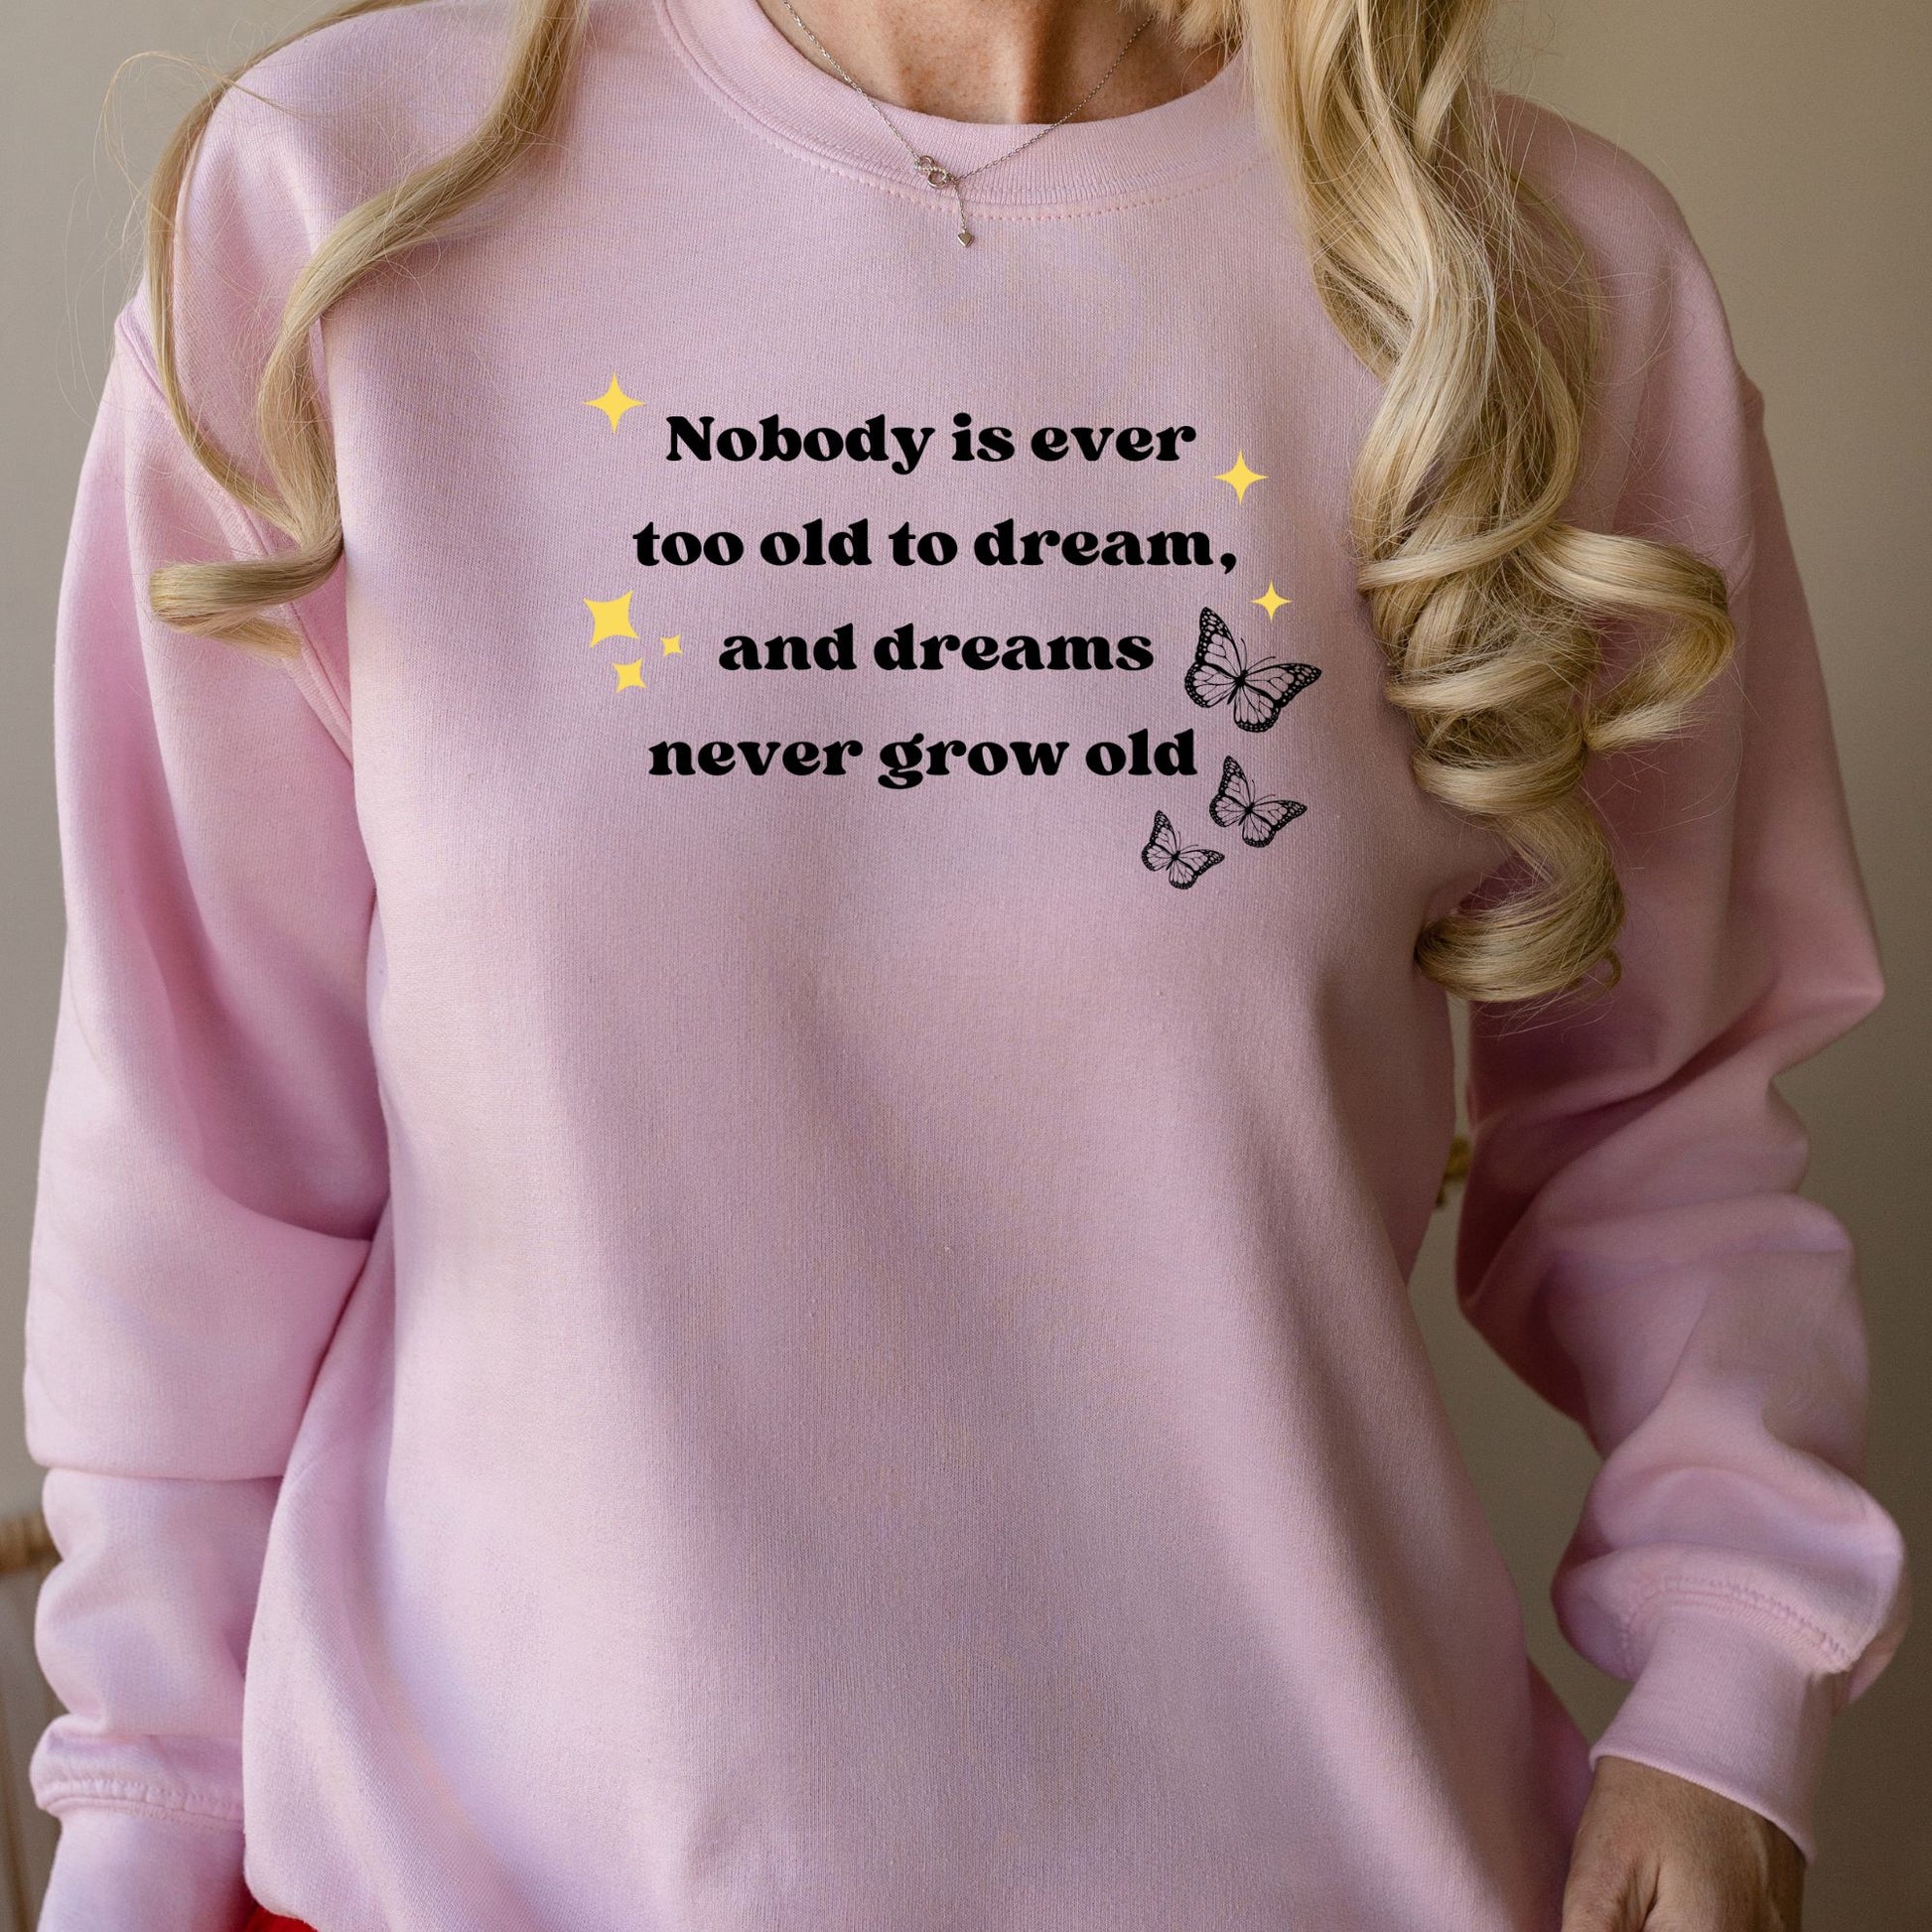 Anne of Green Gables Pink Sweatshirt| Nobody is ever too old to dream | L.M MONTGOMERY | Starlit Prose bookish merch